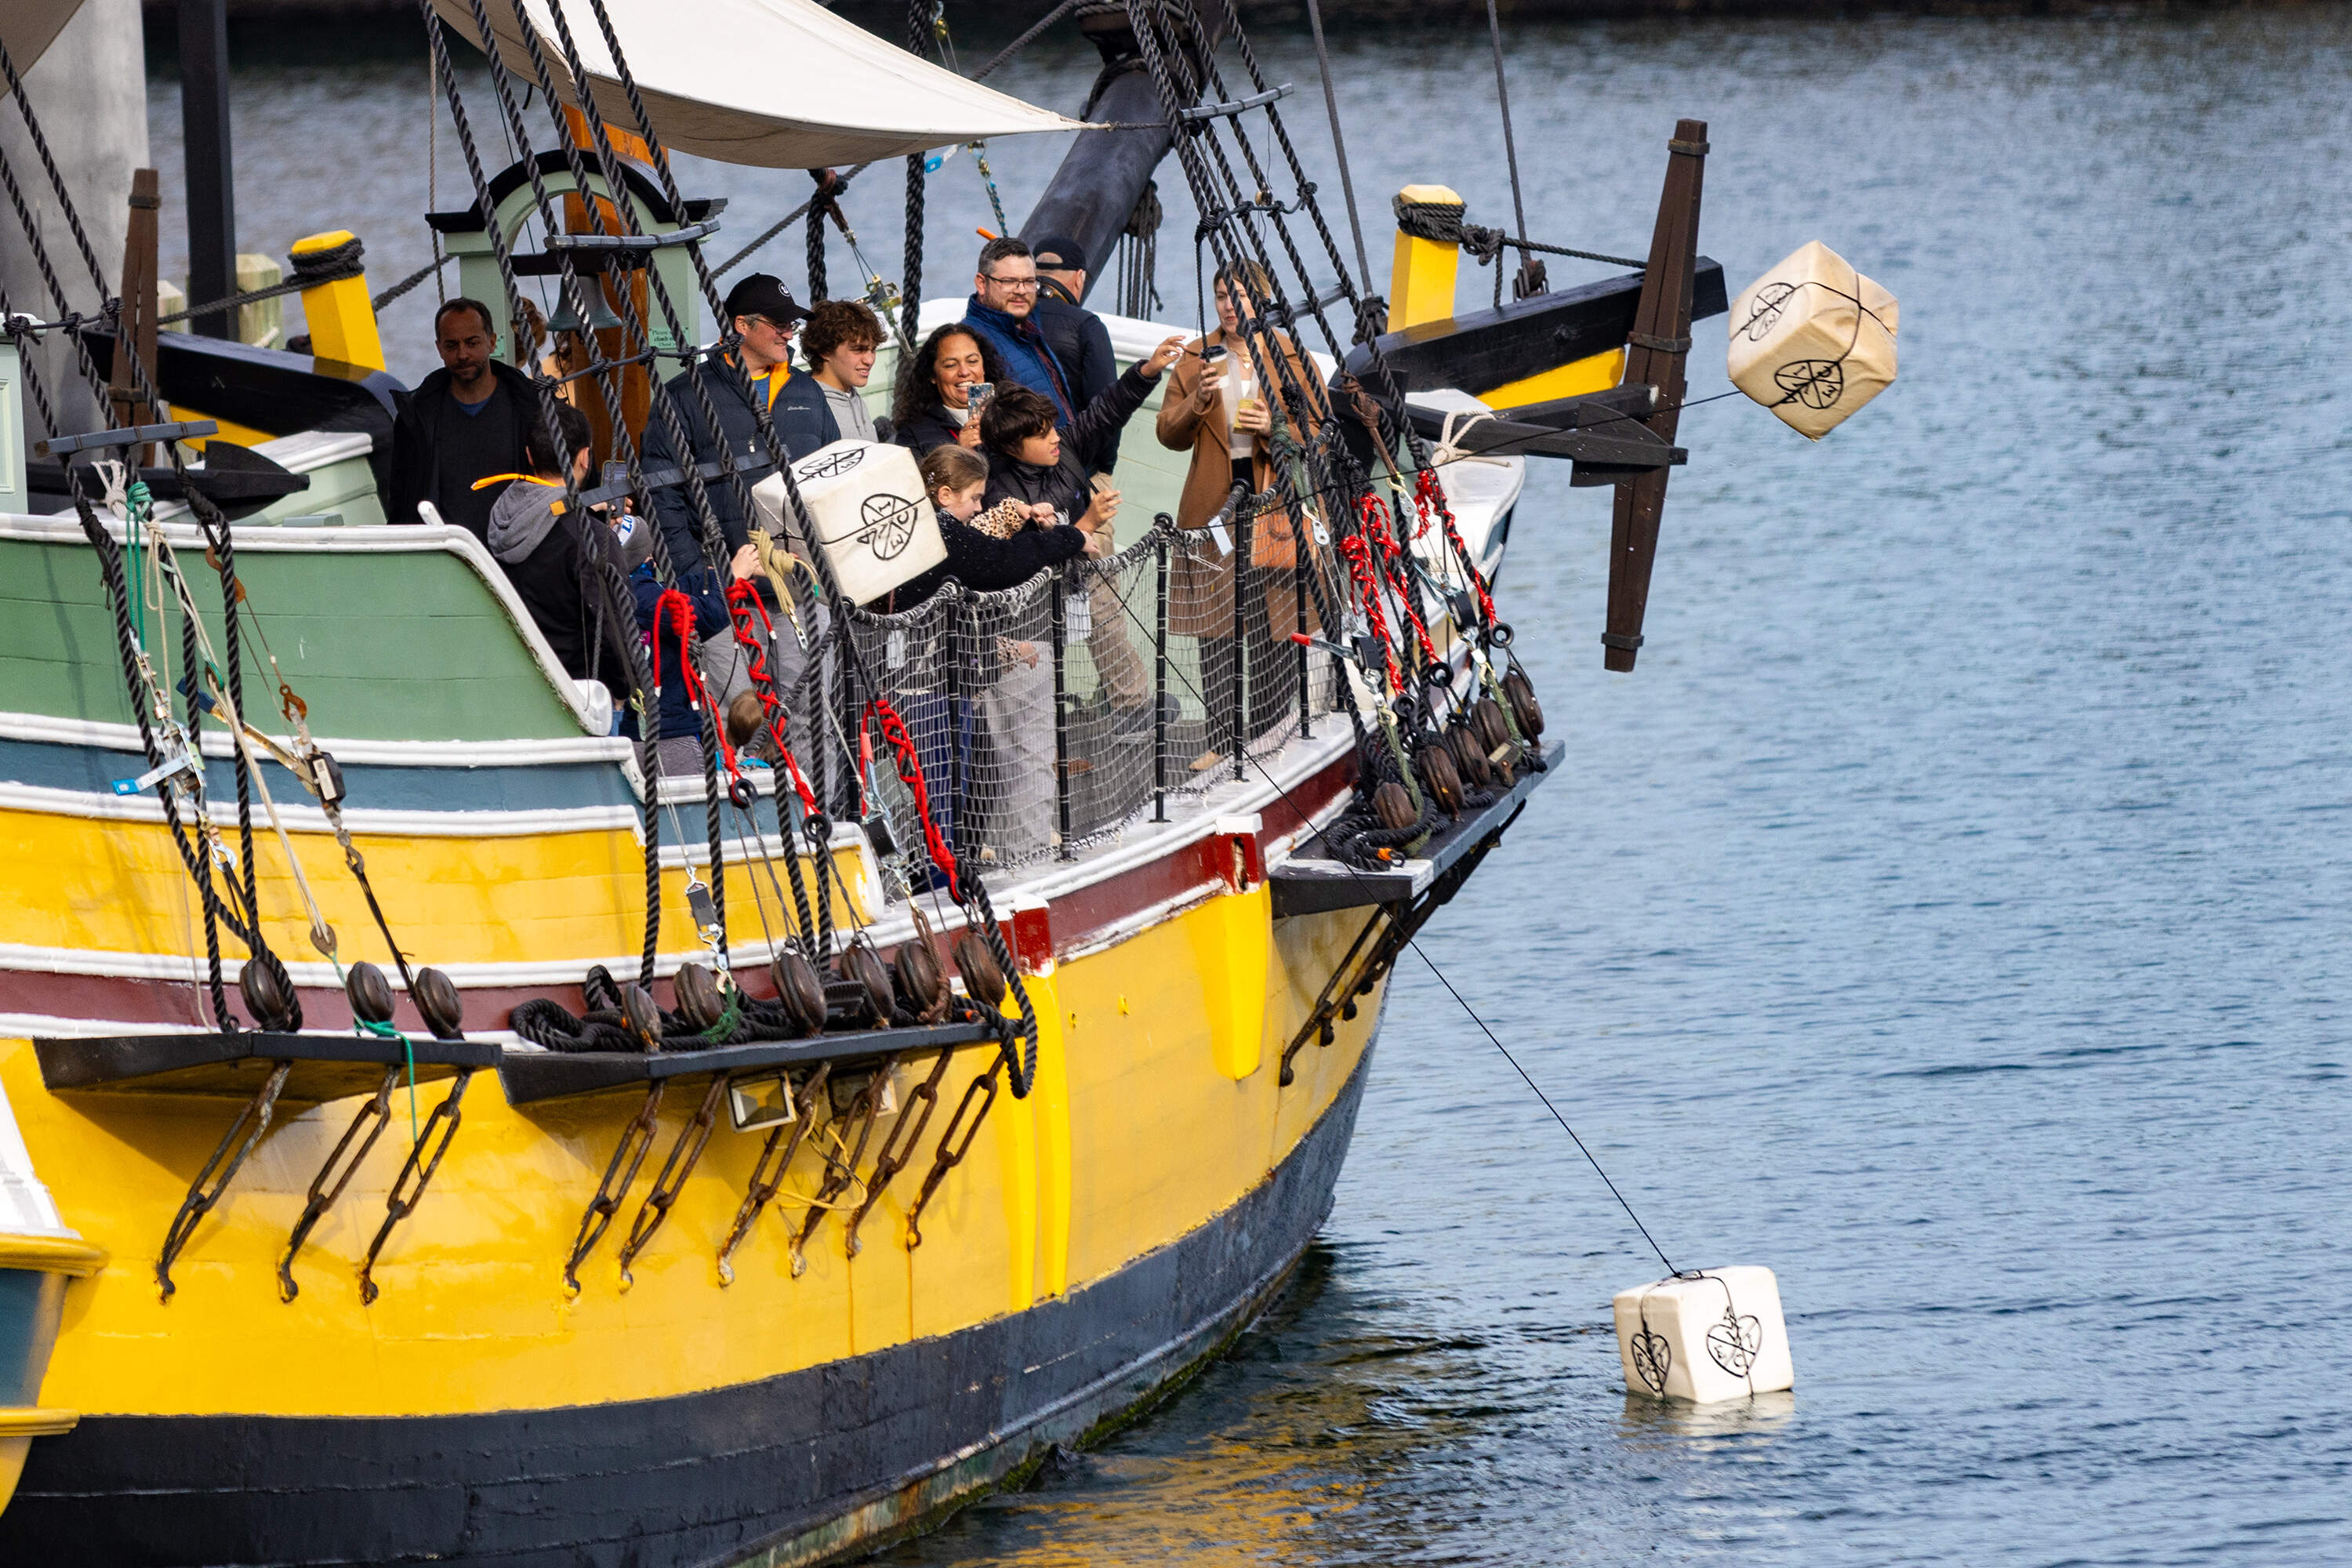 Crates splash into the Fort Point Channel after being tossed overboard by three young museum goers from the merchant vessel Eleanor during a visit to the Boston Tea Party Museum. (Jesse Costa/WBUR)